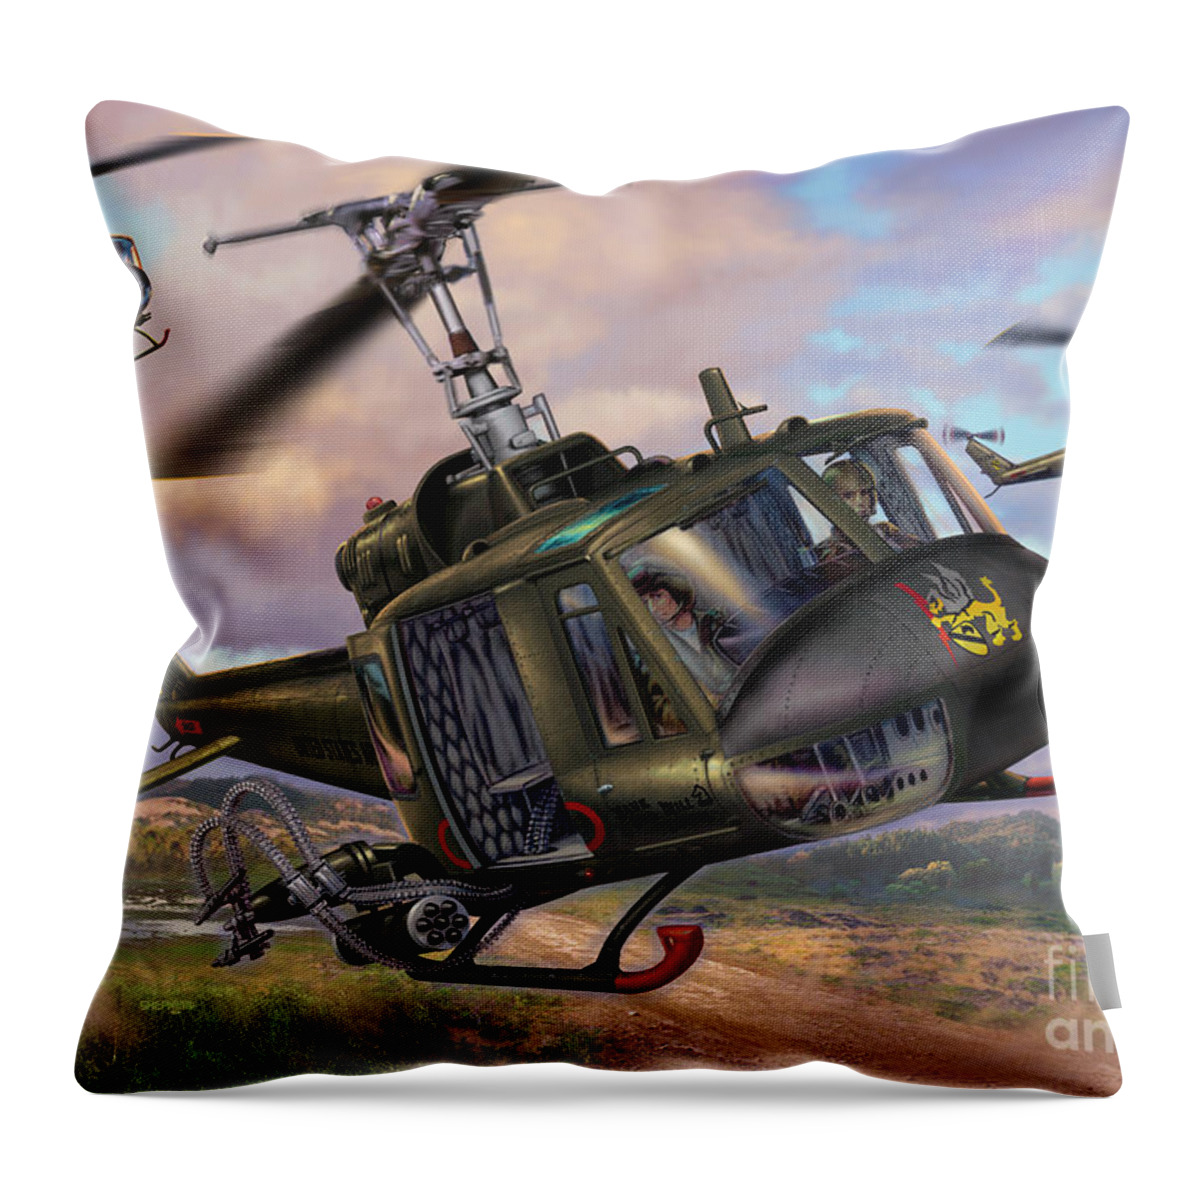 Bell Throw Pillow featuring the digital art Hueys In The LZ by Stu Shepherd